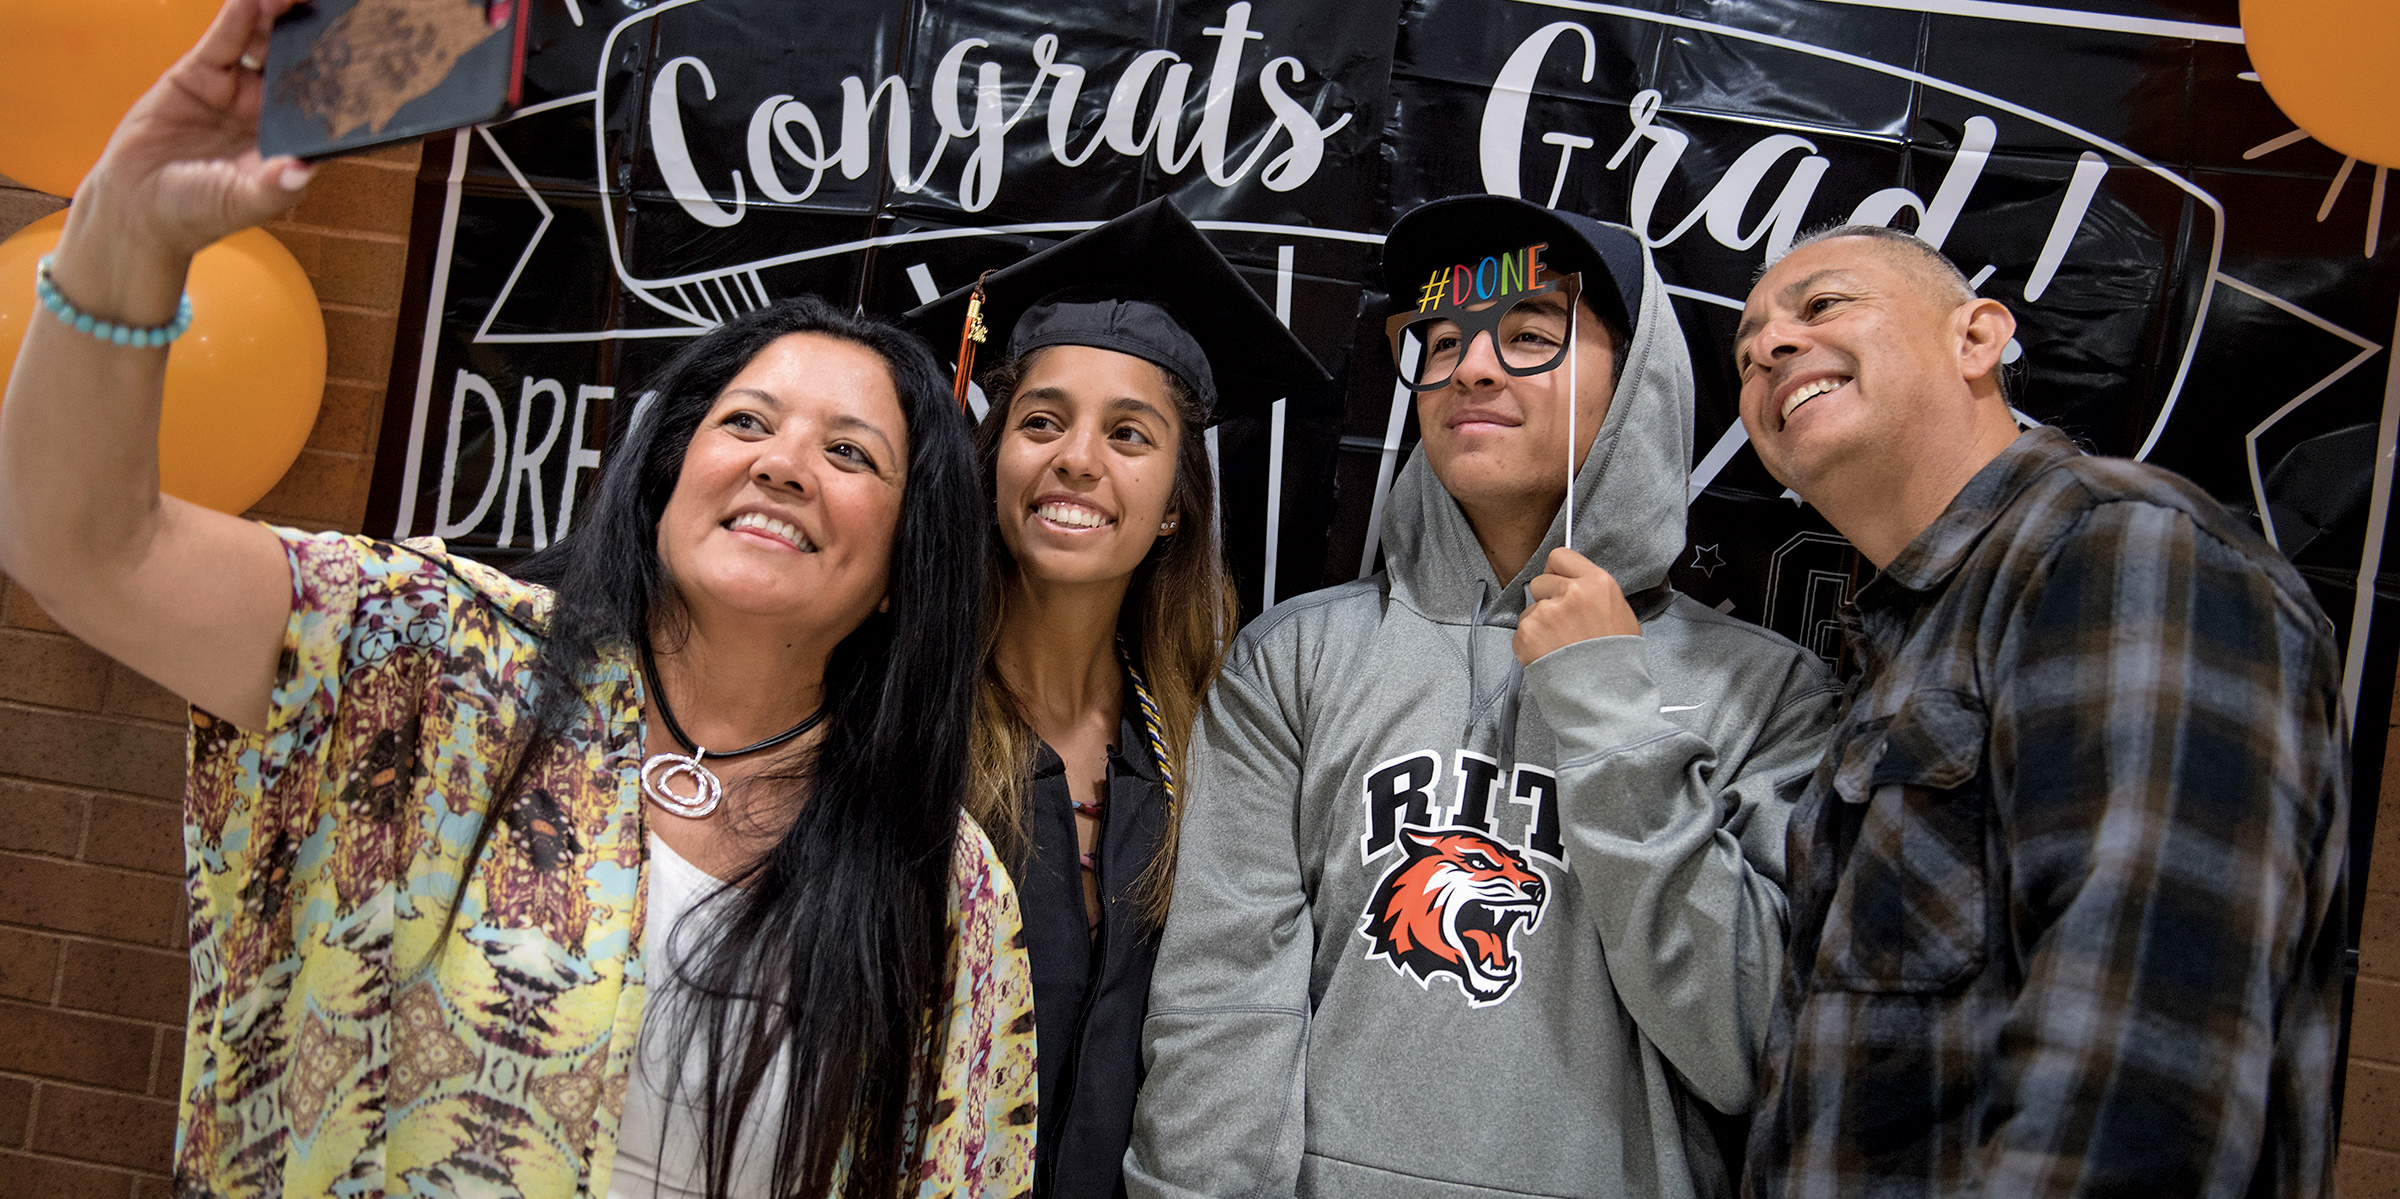 Parents and grads pose for selfie